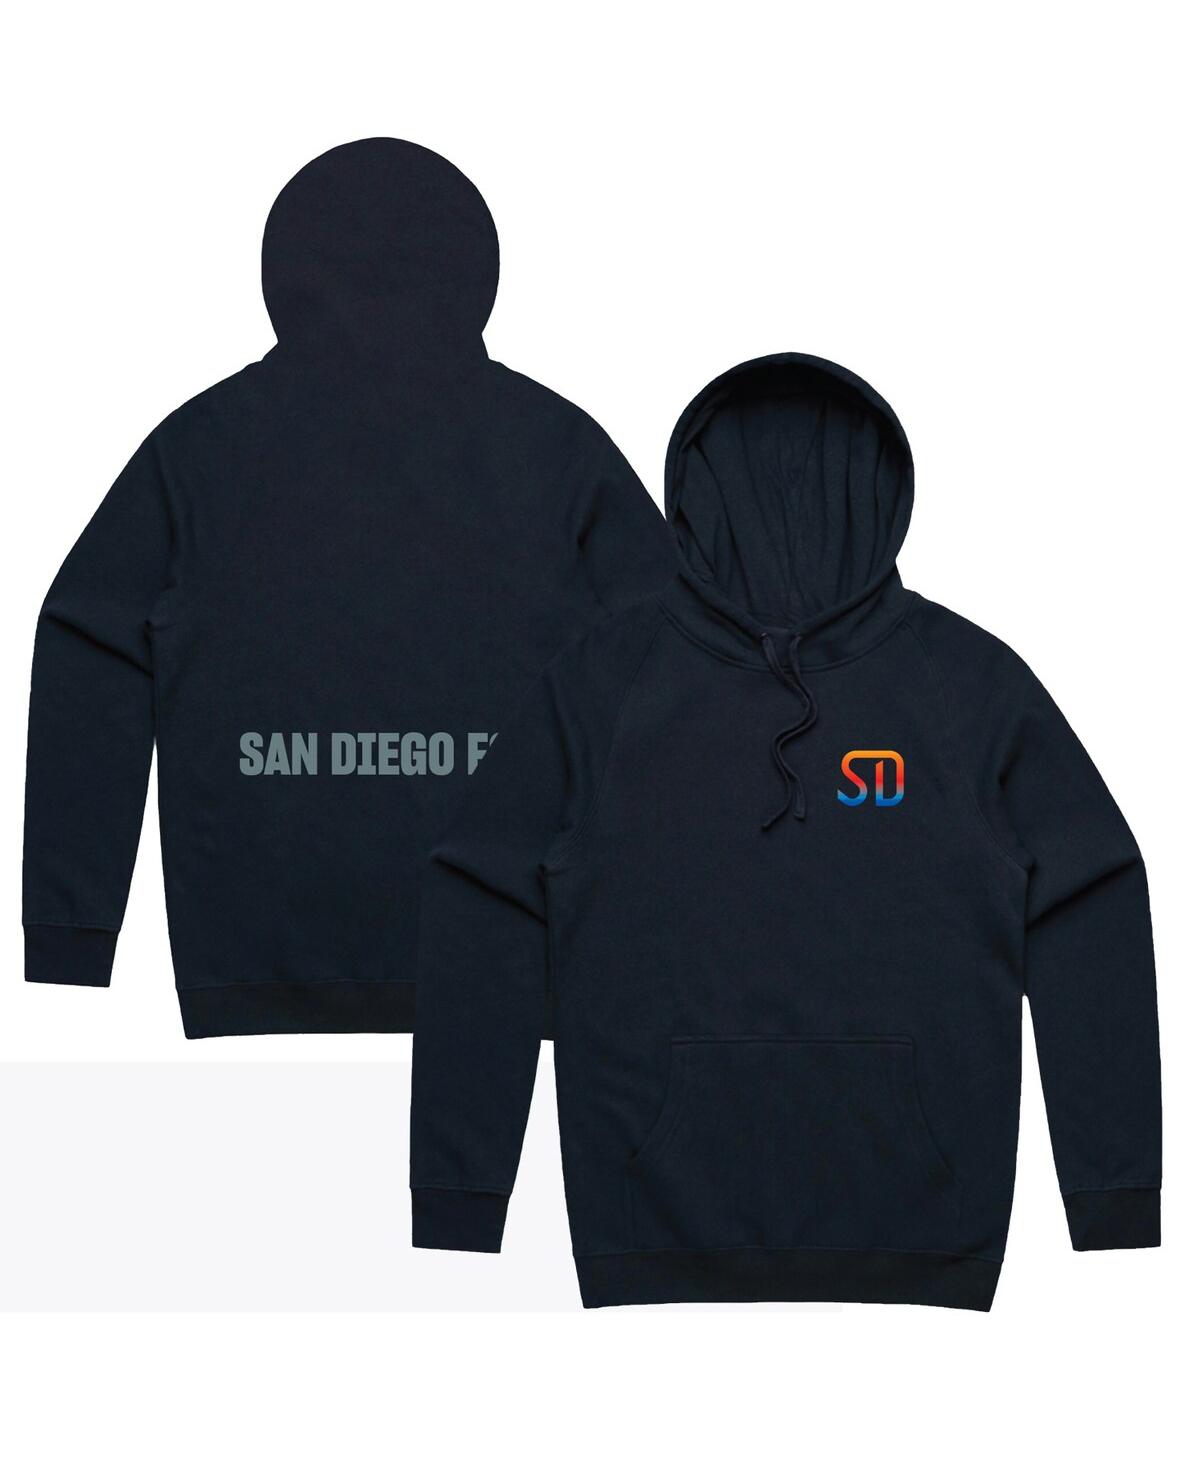 Men's and Women's Peace Collective Navy San Diego Fc Pullover Hoodie - Navy